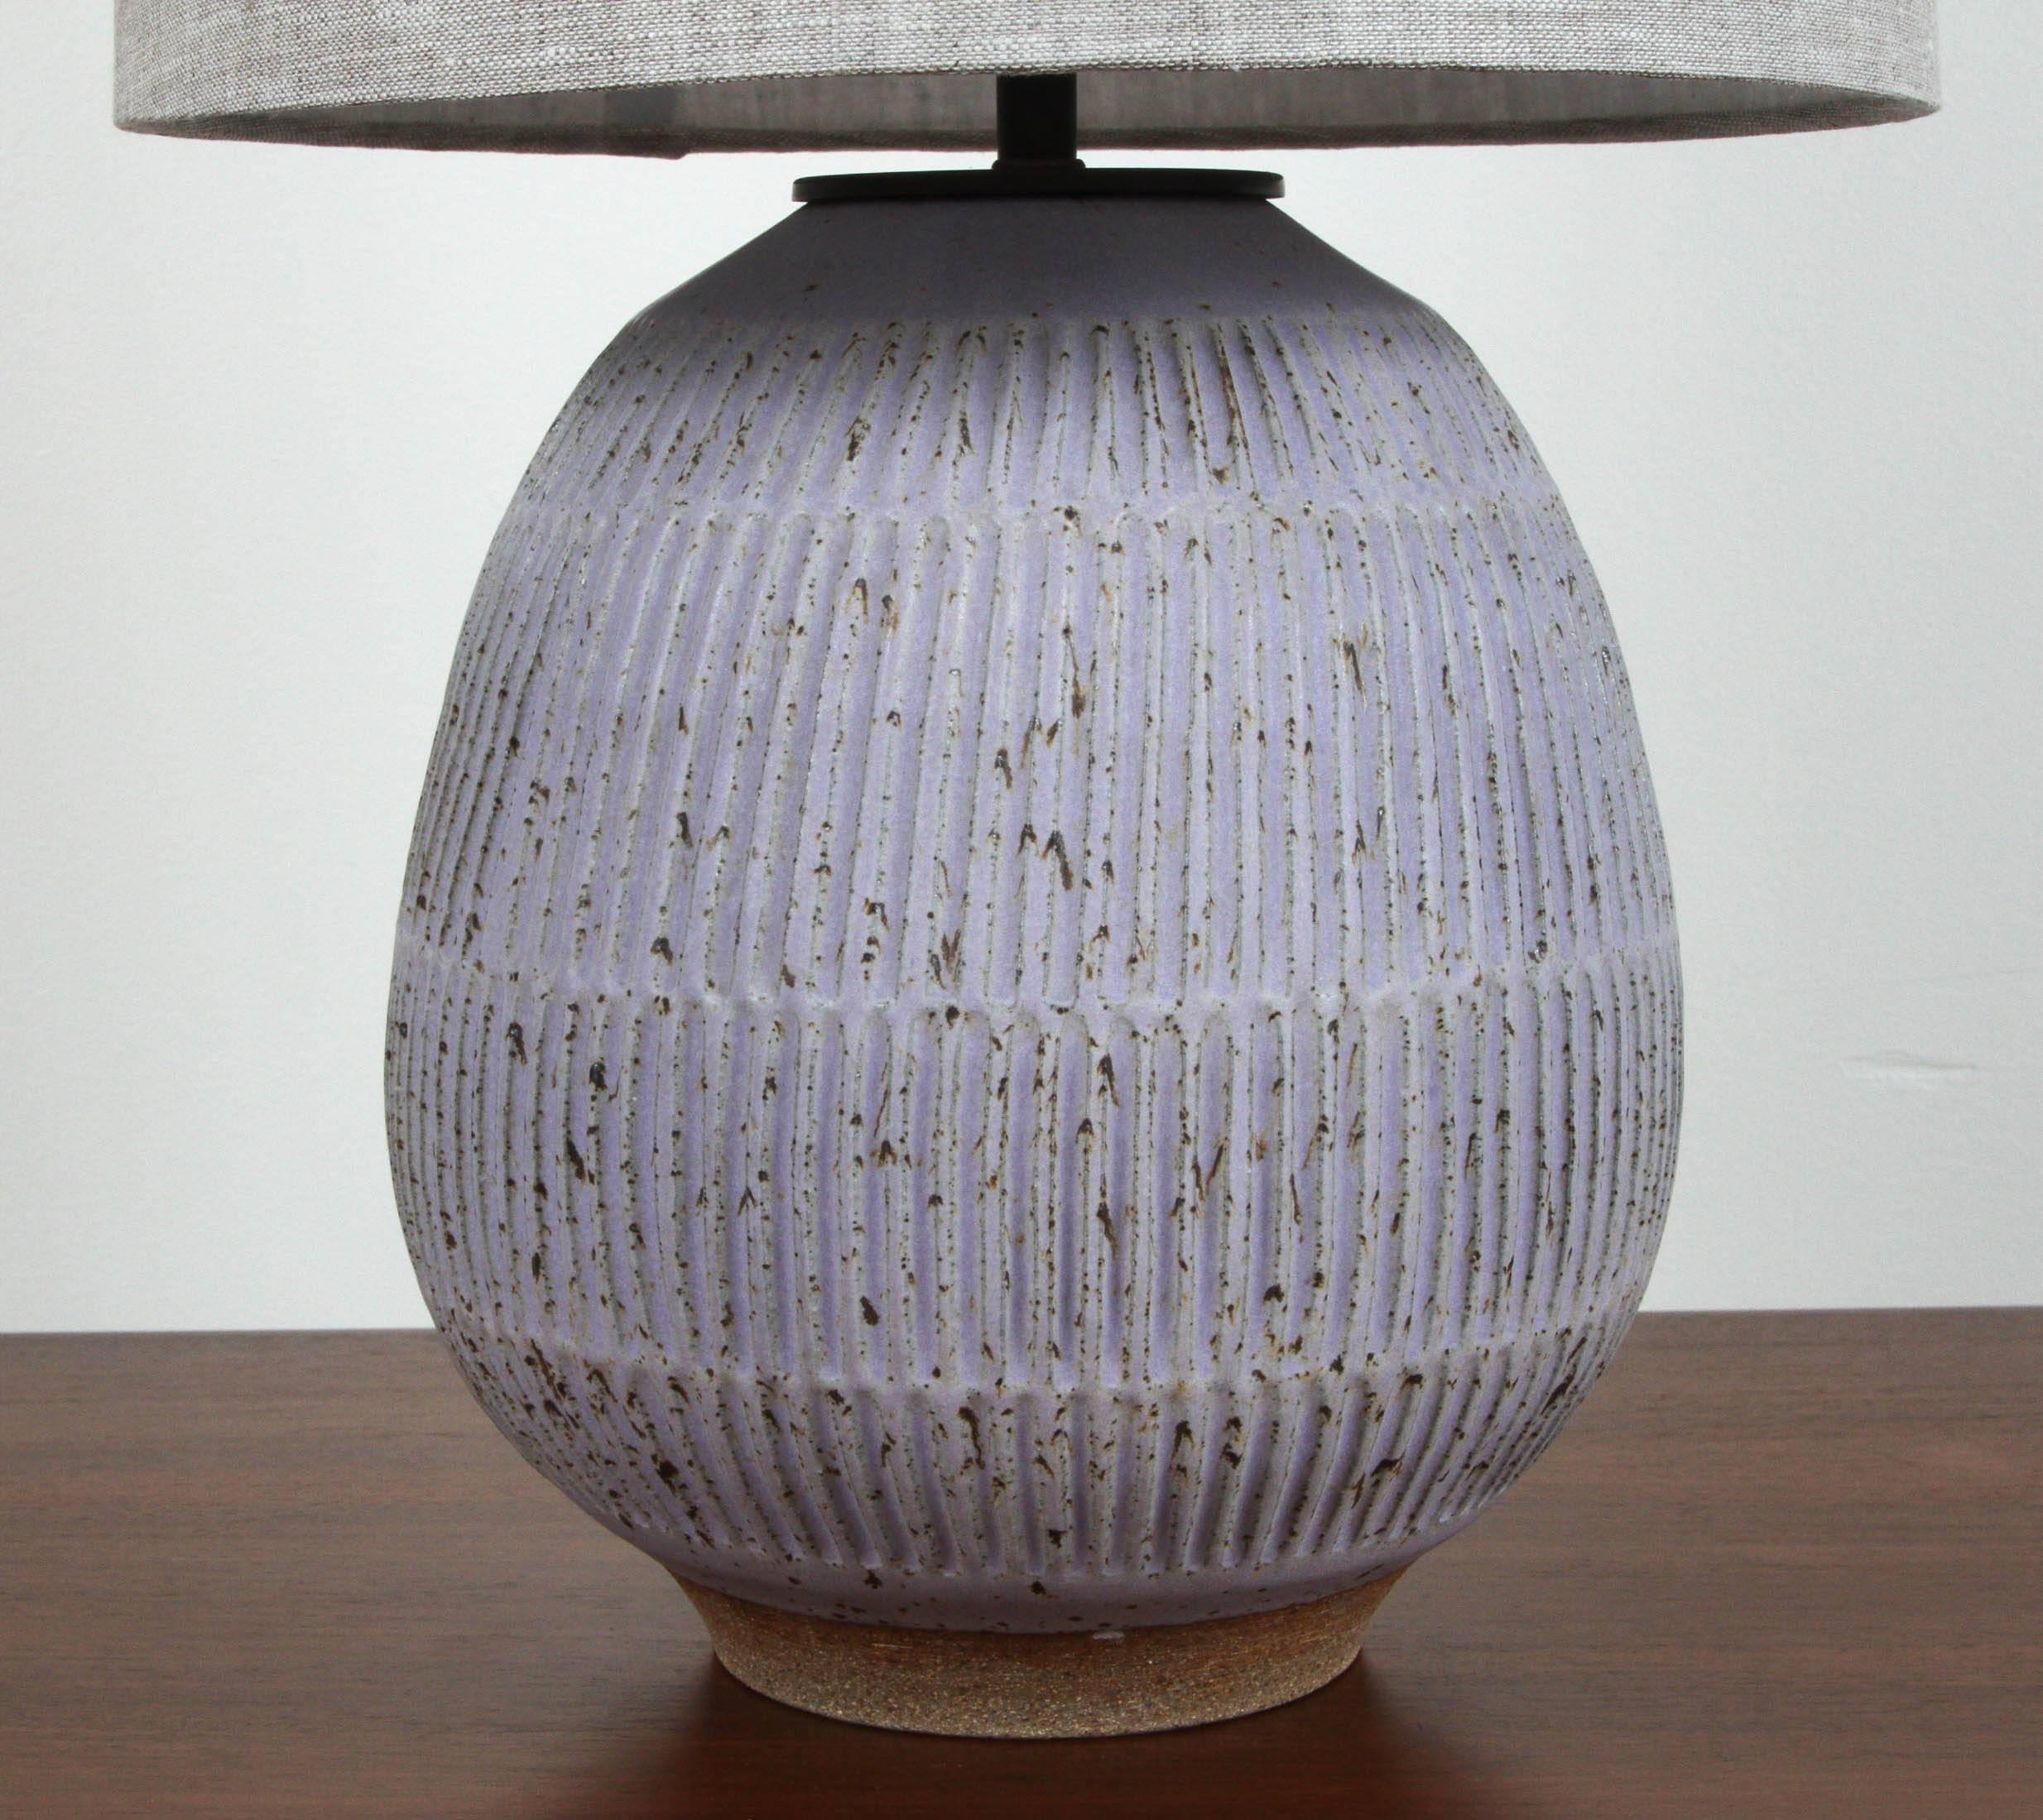 Hand-carved Lavender stoneware lamp by Mt. Washington pottery.